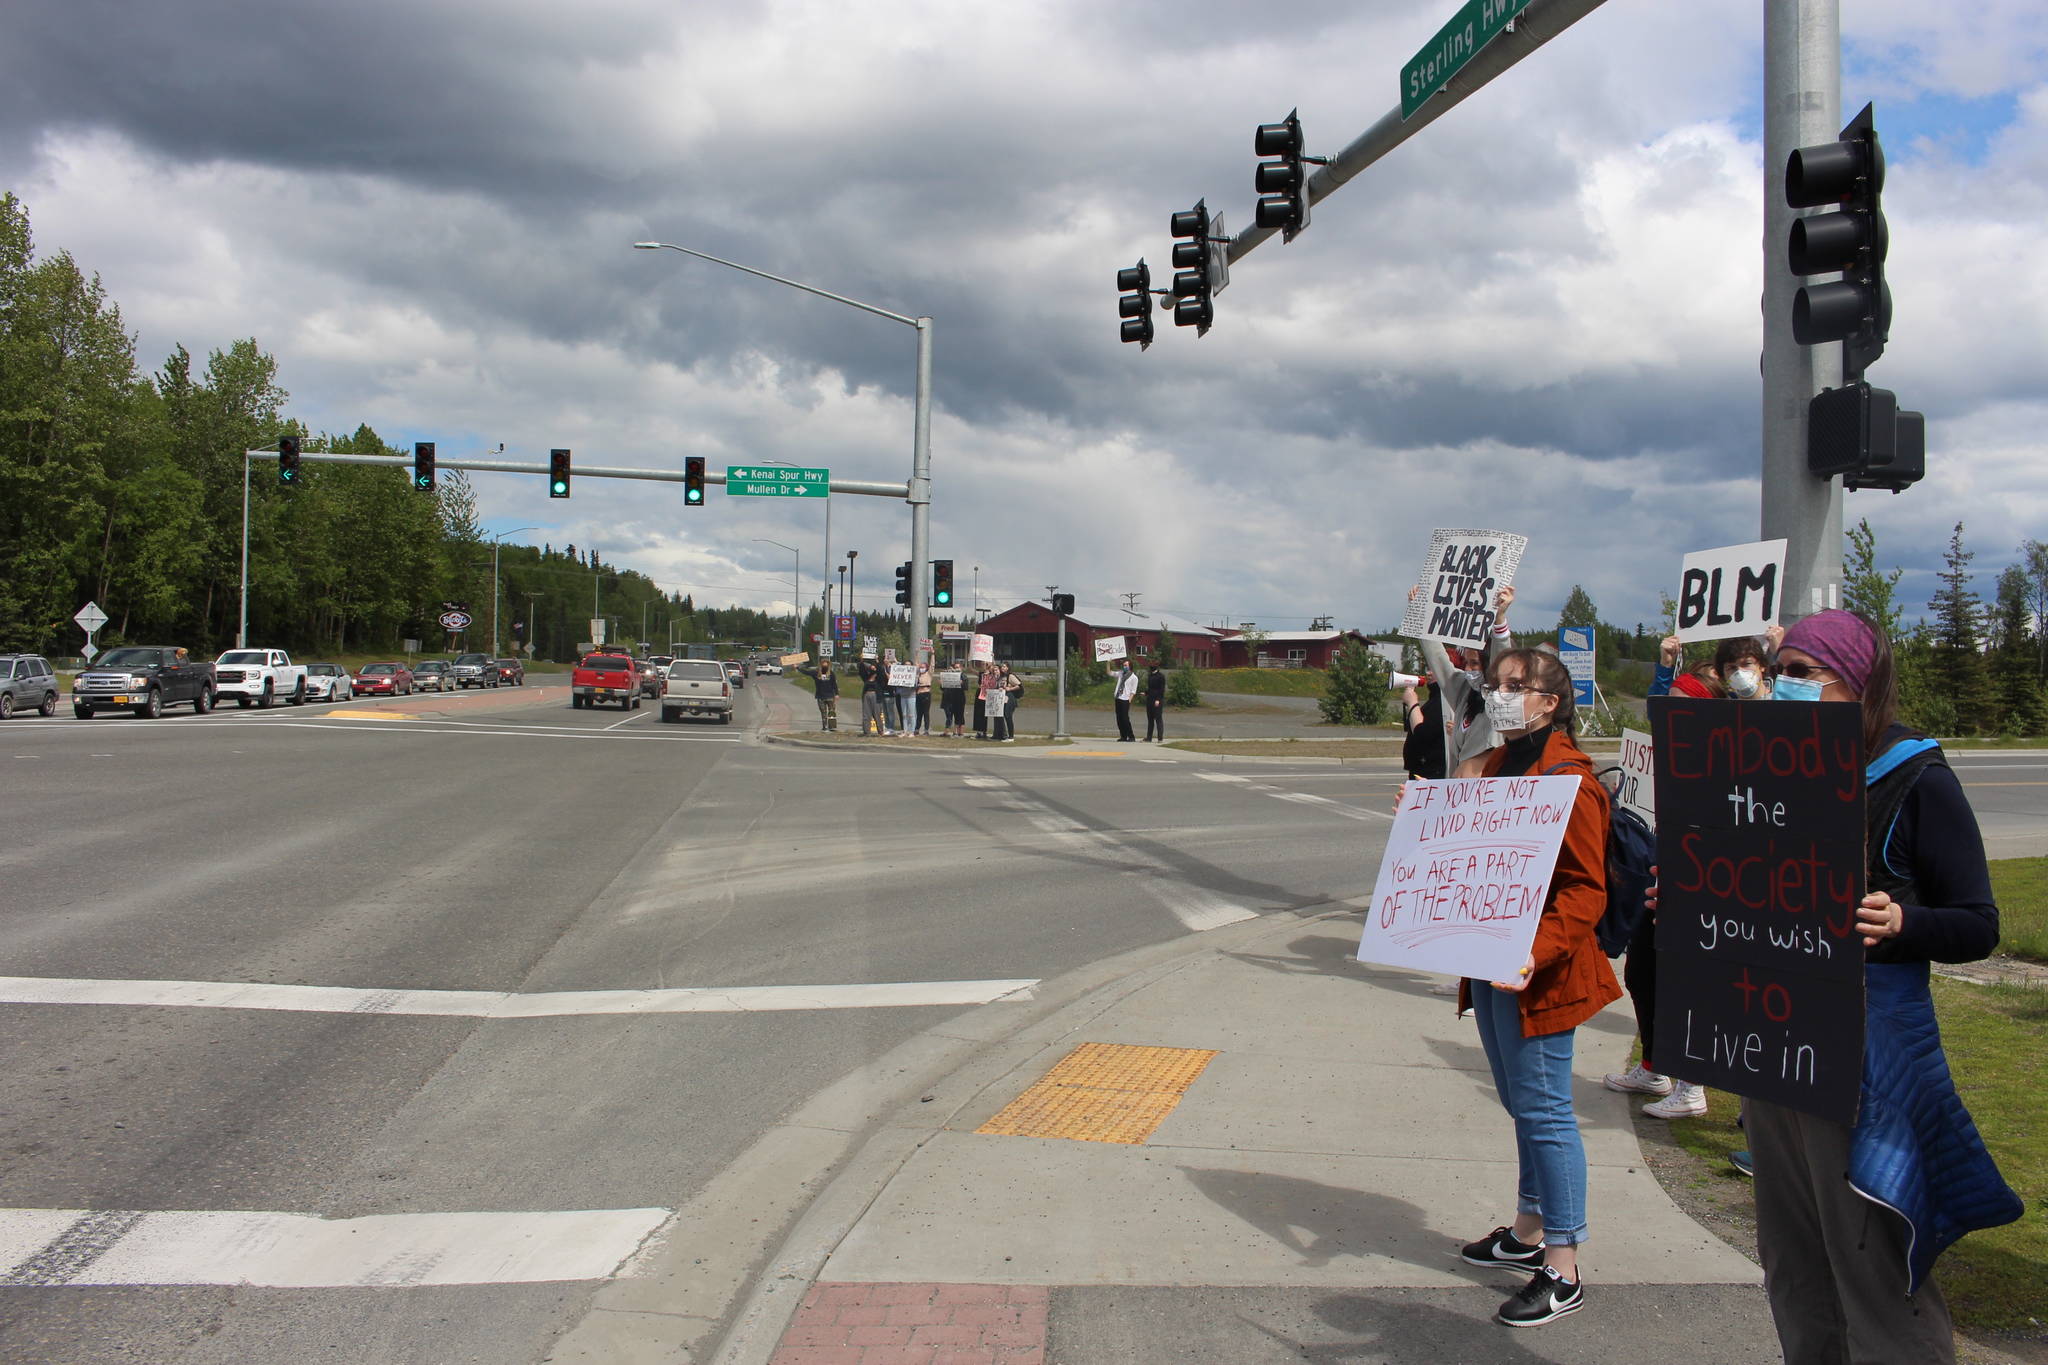 Participants in a Black Lives Matter protest stand at the “Y” intersection of the Kenai Spur and Sterling Highways in Soldotna, Alaska, on June 3, 2020. (Photo by Brian Mazurek/Peninsula Clarion)